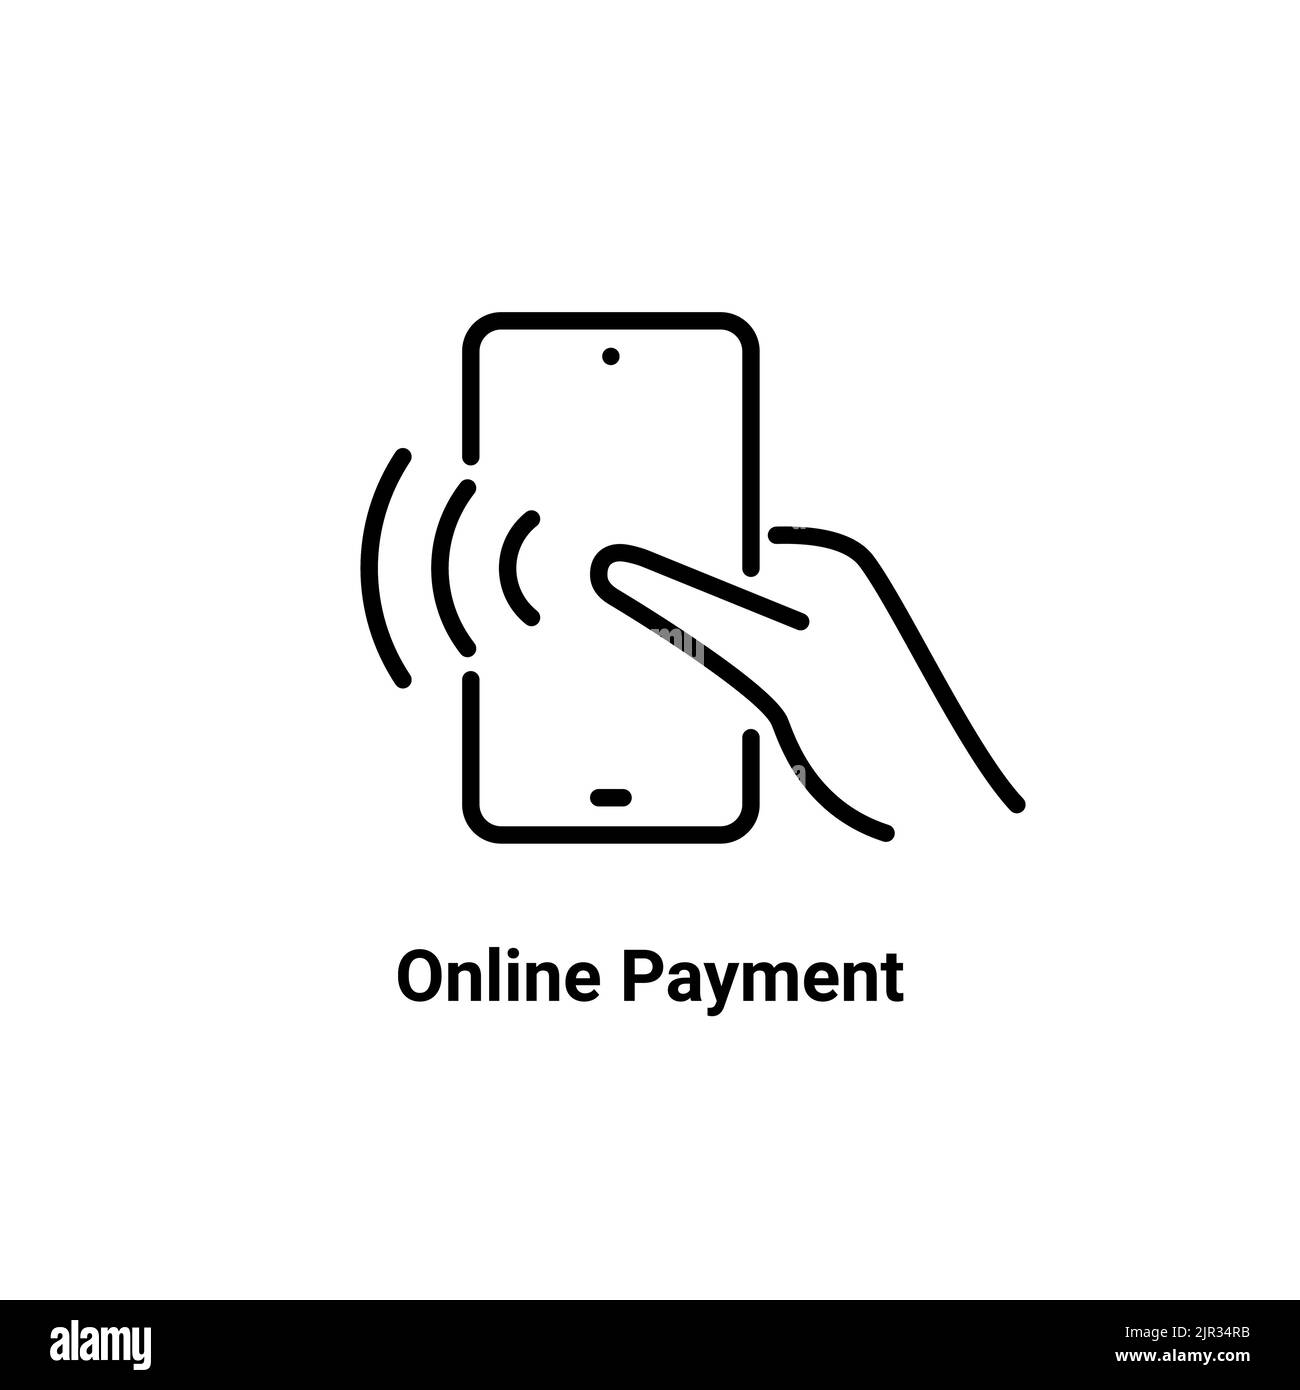 Online mobile payment icon. Digital phone pay electronic currency smartphone transaction line icon. Stock Vector